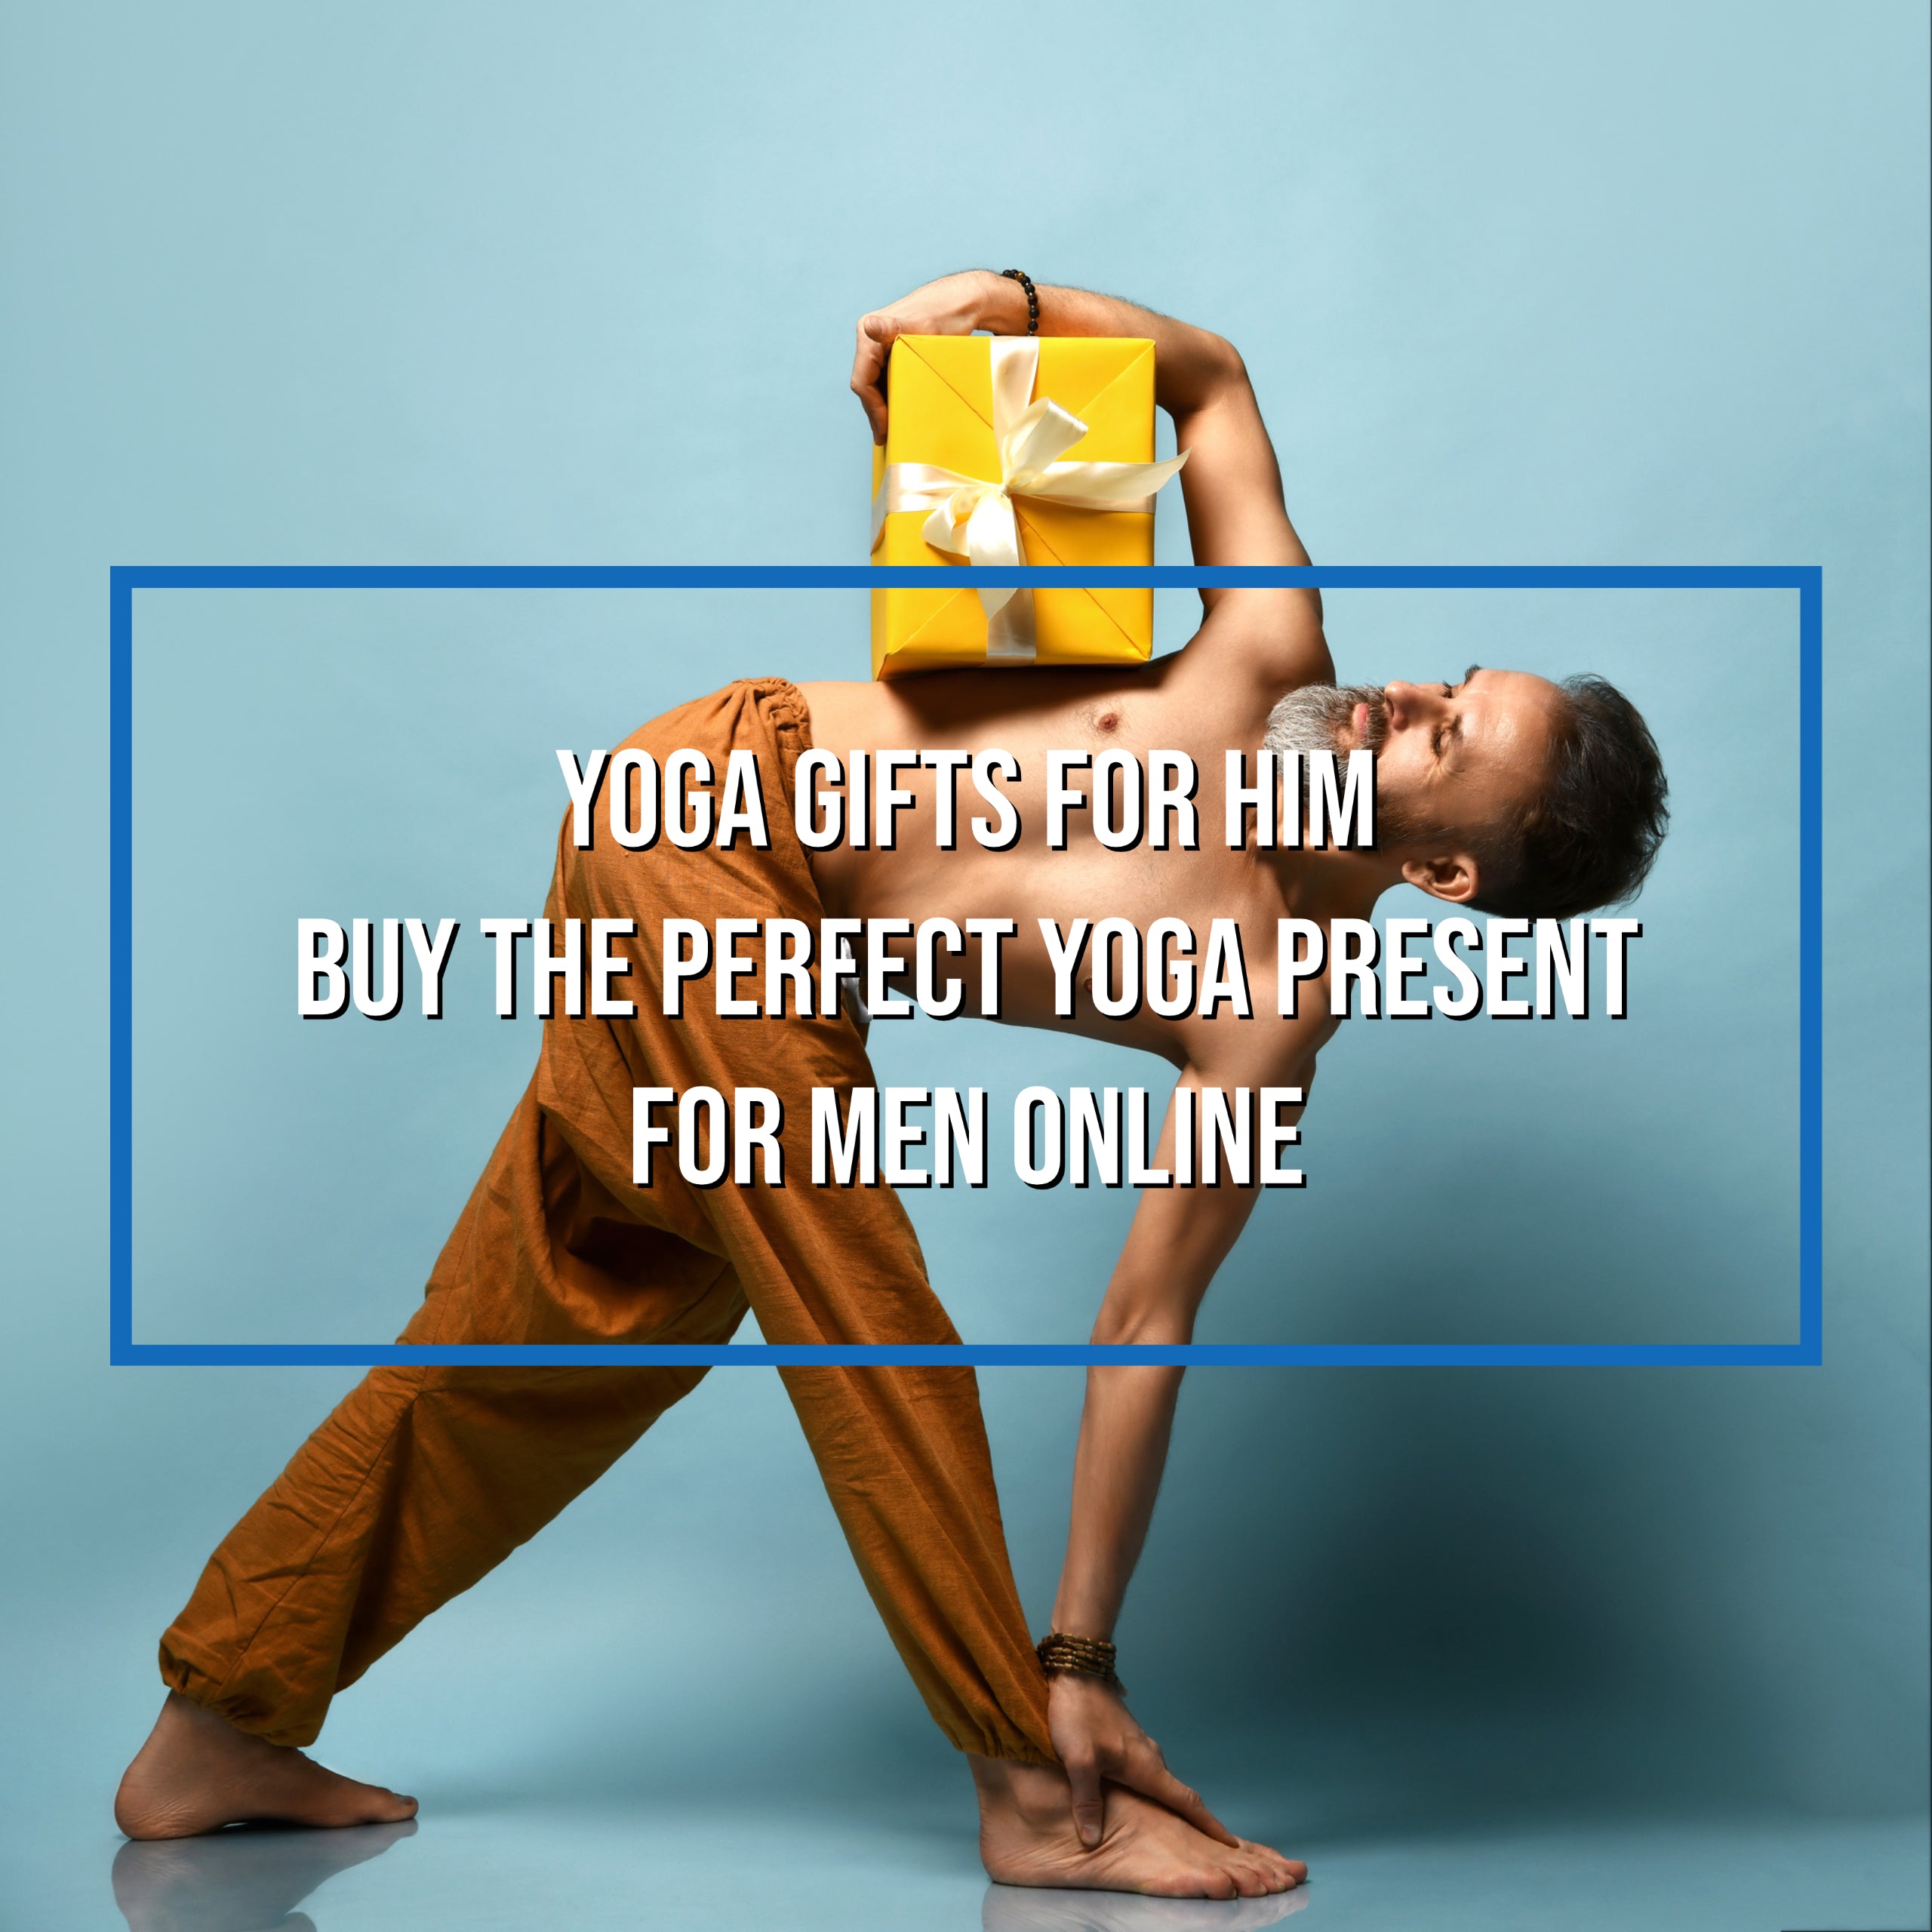 Yoga Gifts For Women Gift For Men Yoga Gifts For Her Best Friend Gift Yoga  Gift